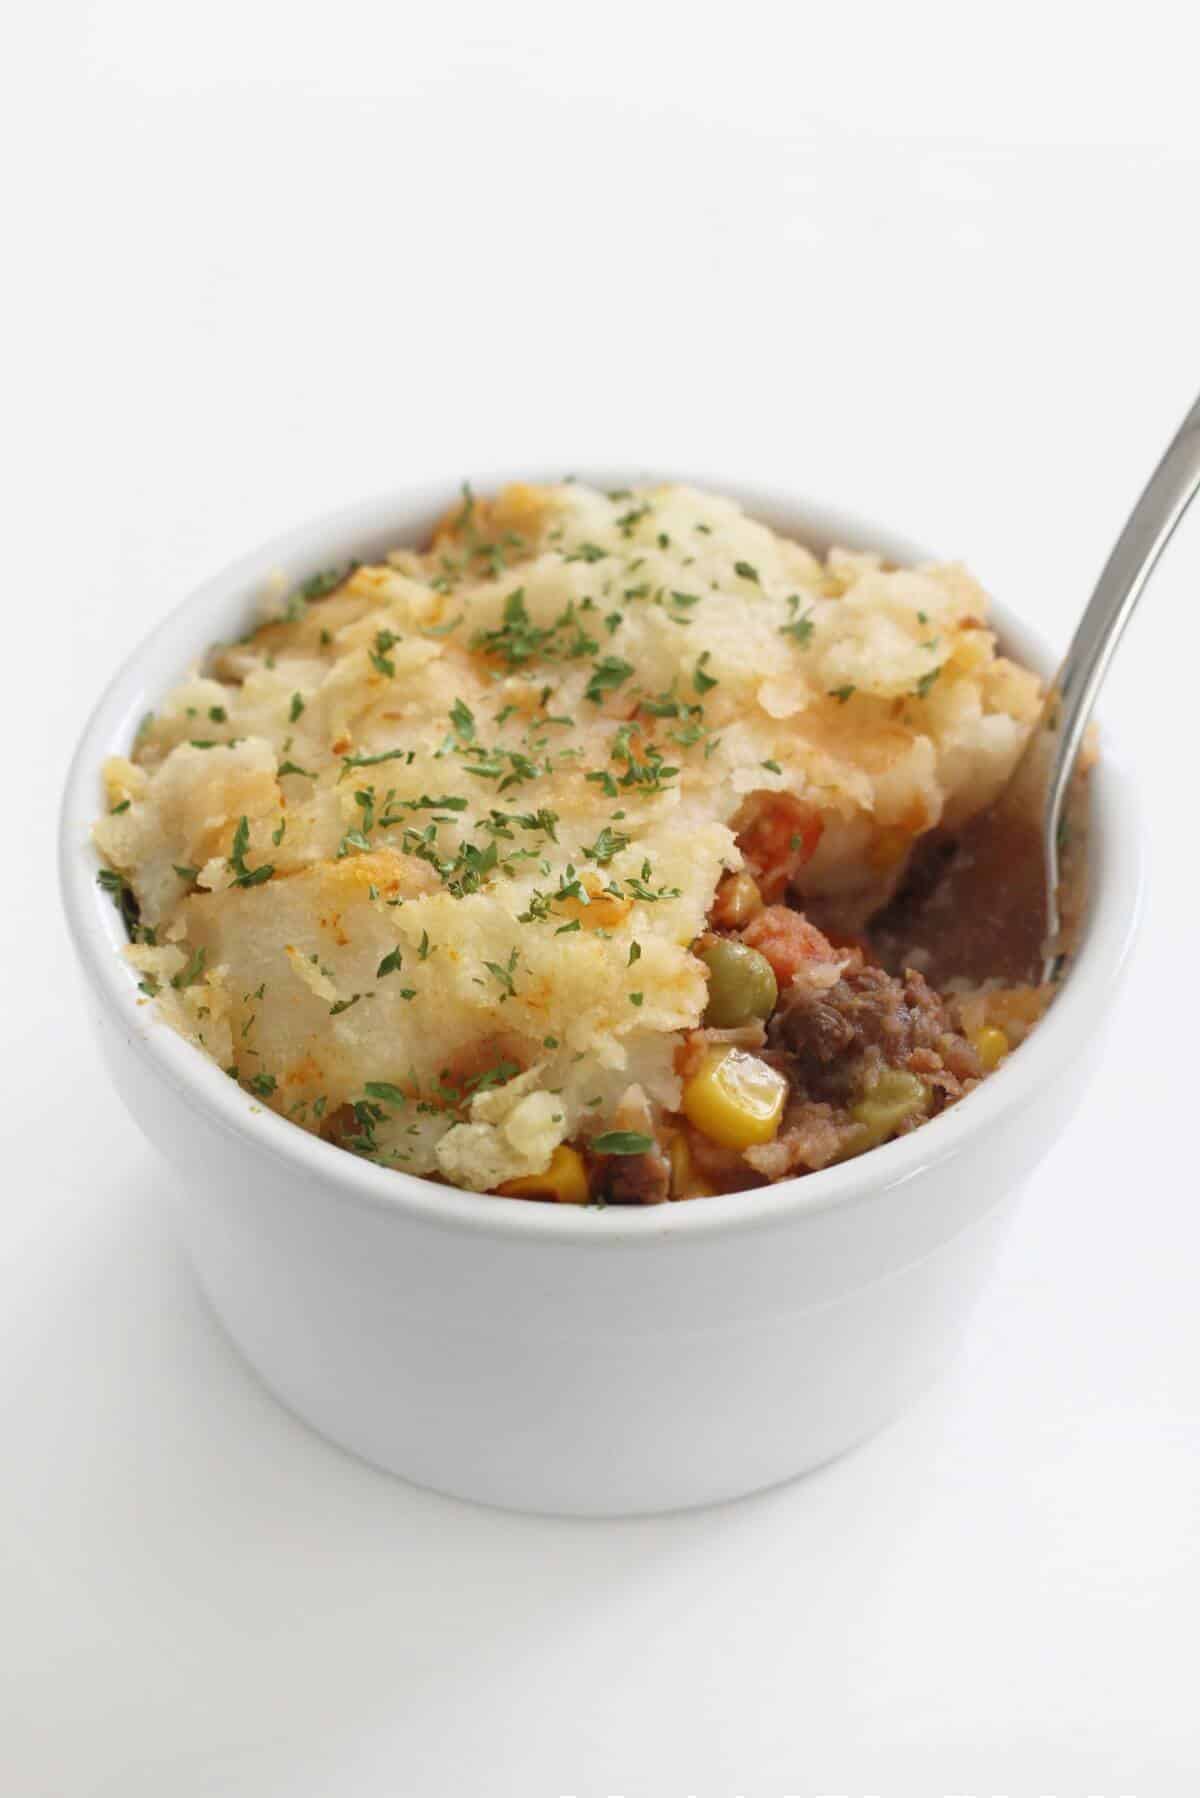 A close-up view of the easy lentil shepherd's pie placed on a white ramekin.